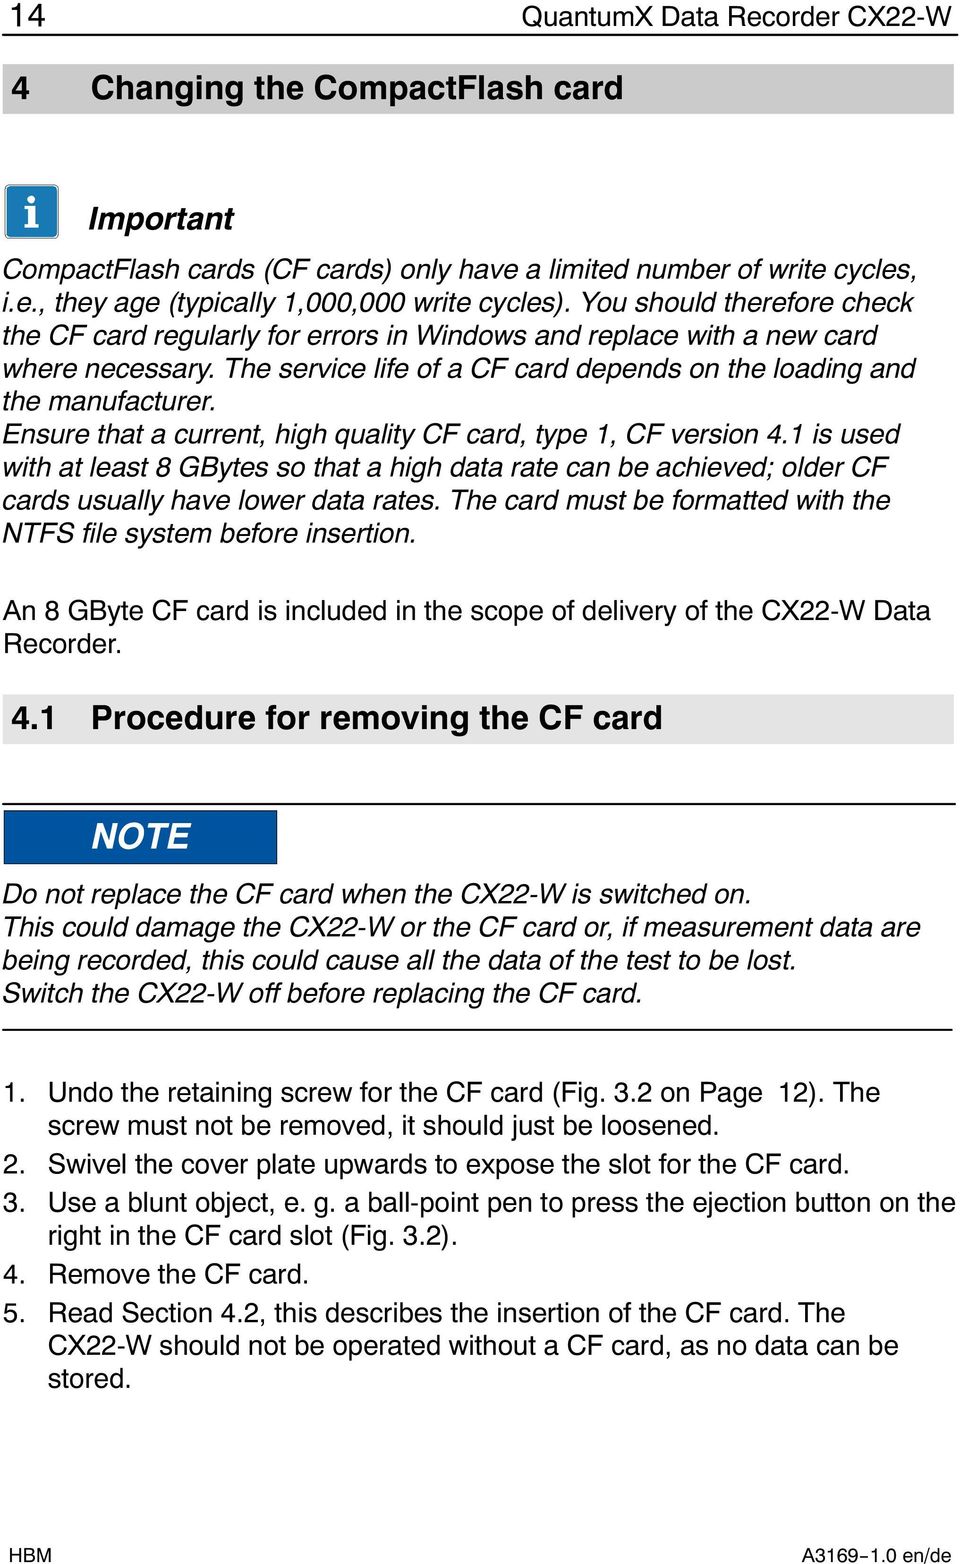 Ensure that a current, high quality CF card, type 1, CF version 4.1 is used with at least 8 GBytes so that a high data rate can be achieved; older CF cards usually have lower data rates.